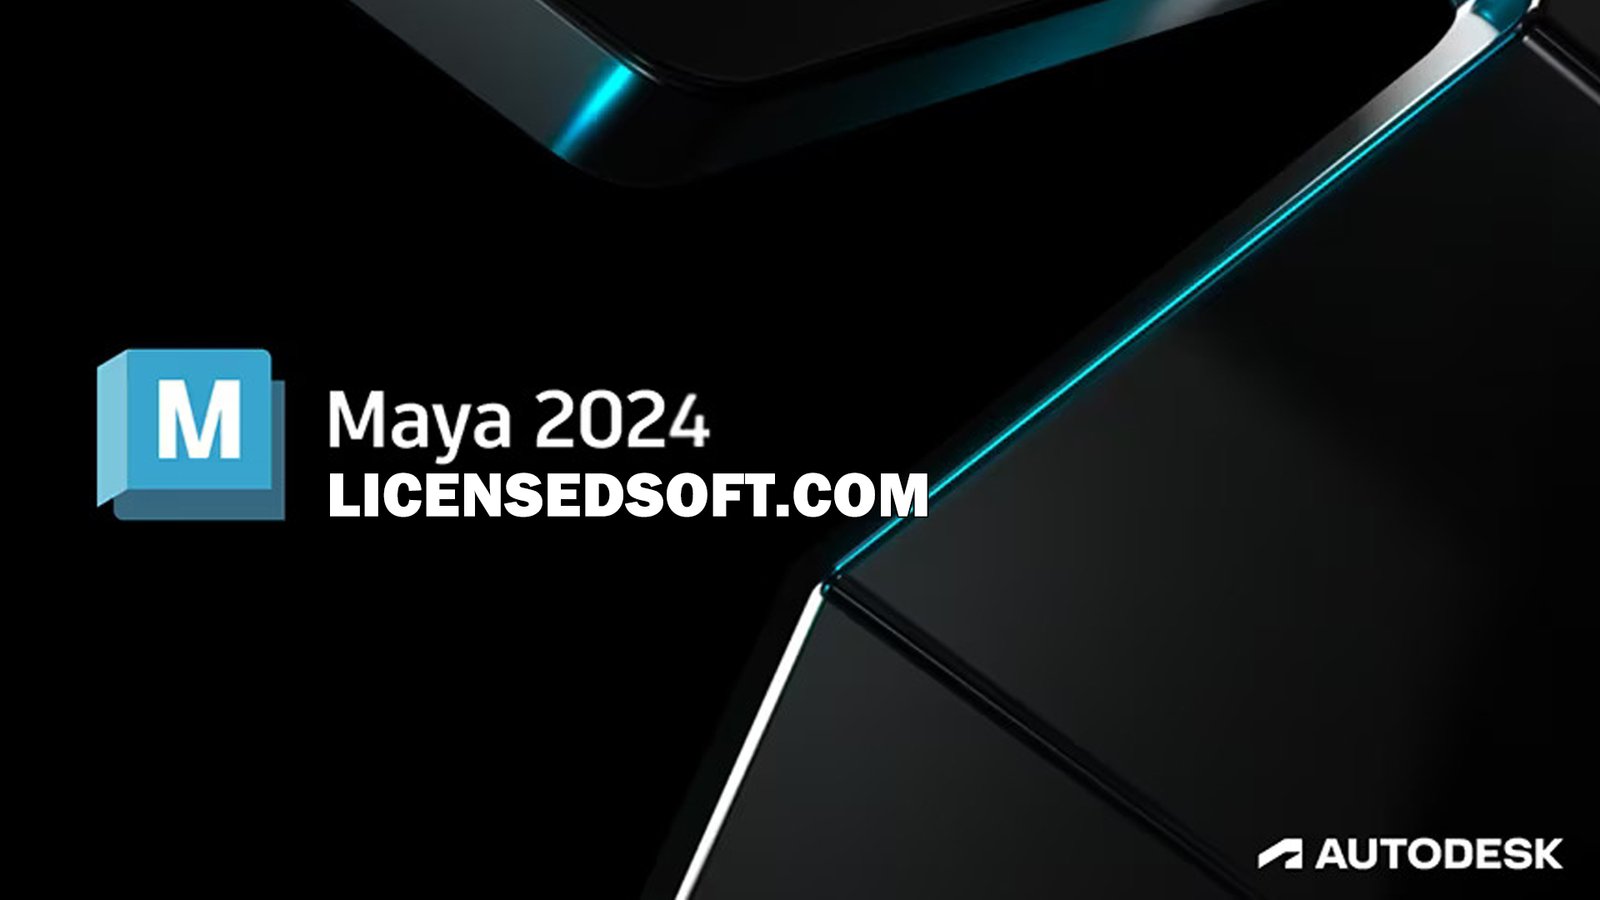 Autodesk Maya 2024 Cover By LicensedSoft